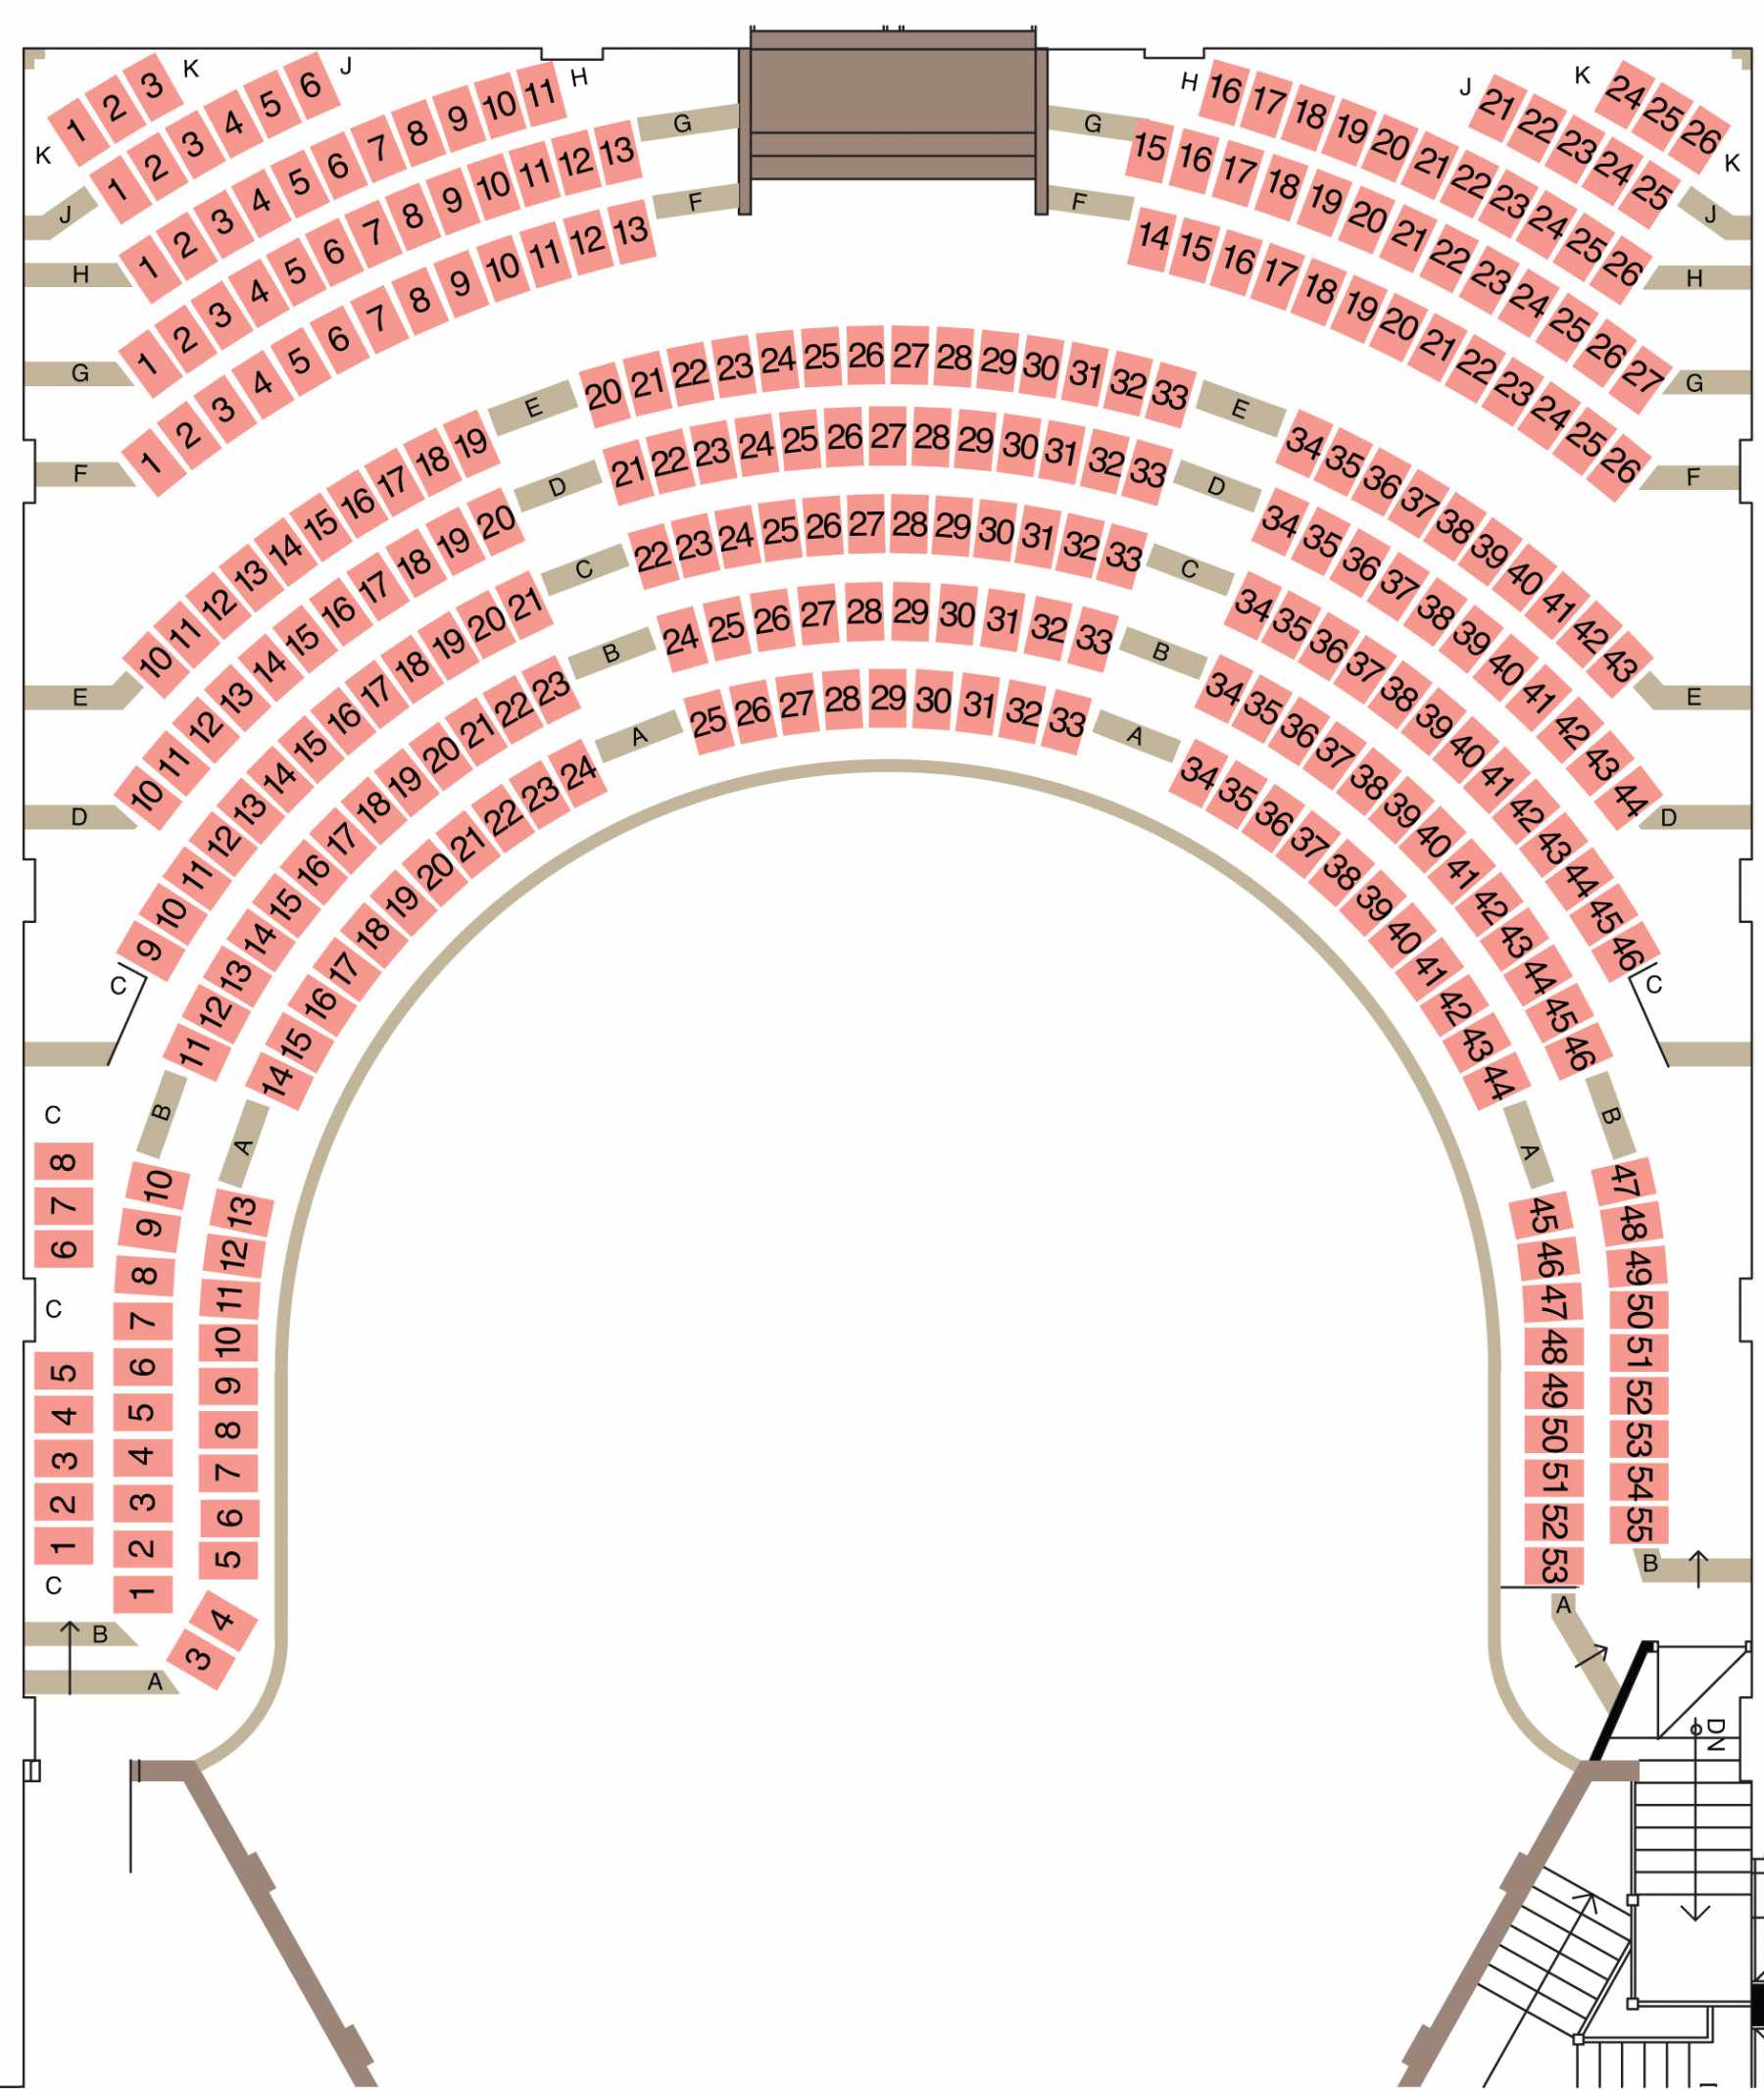 Arts Centre Melbourne Seating Chart